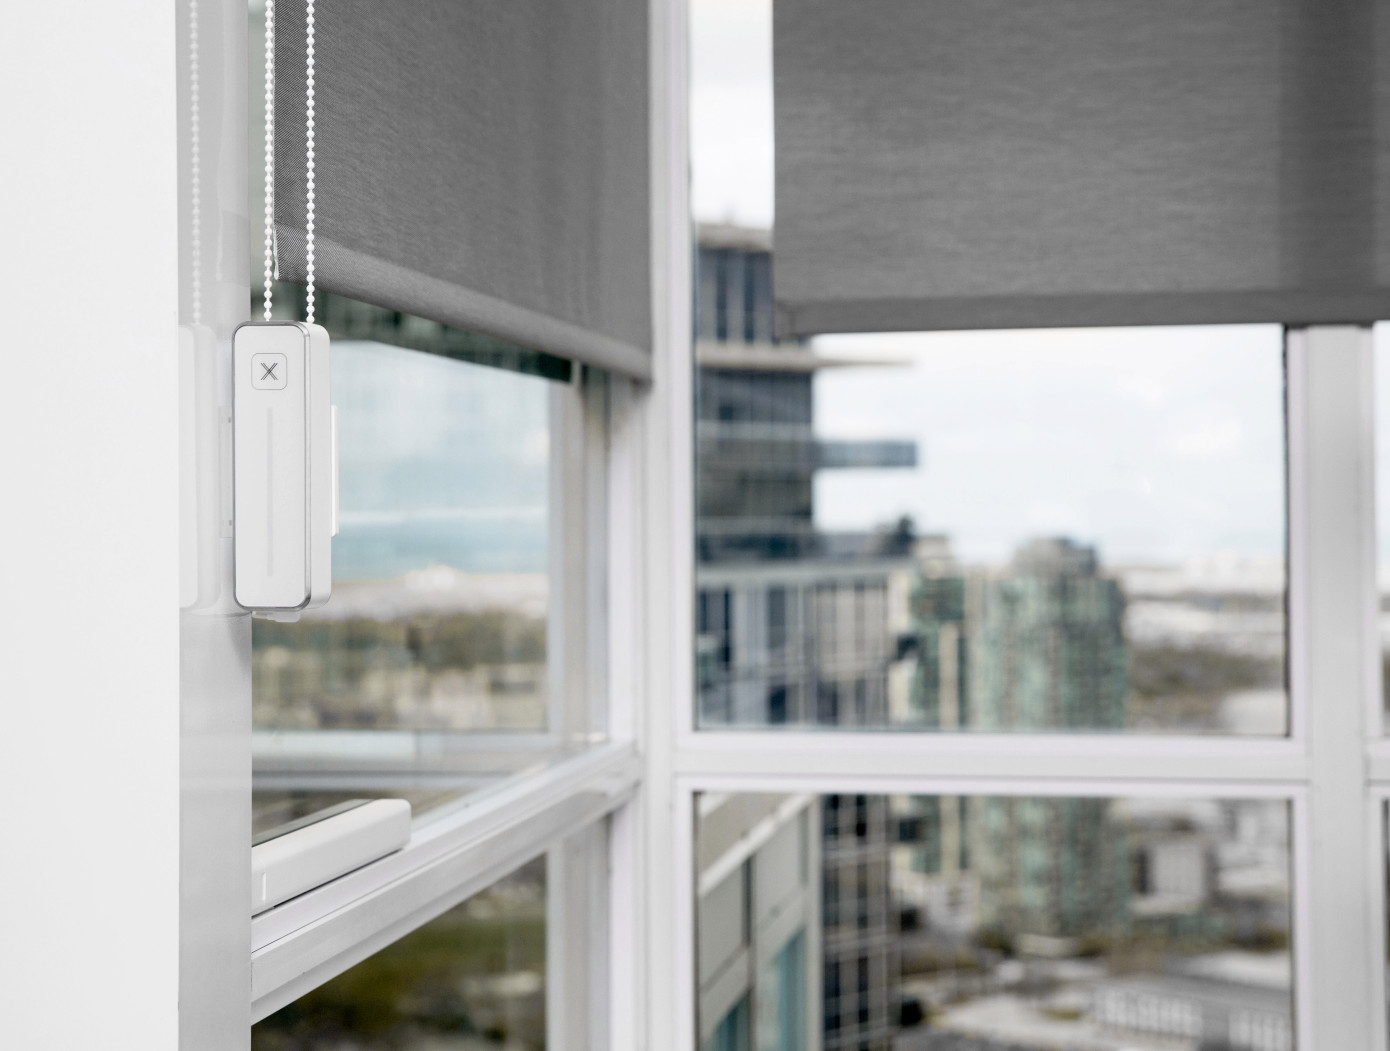 How Axis went from concept to shipping its Gear smart blinds hardware